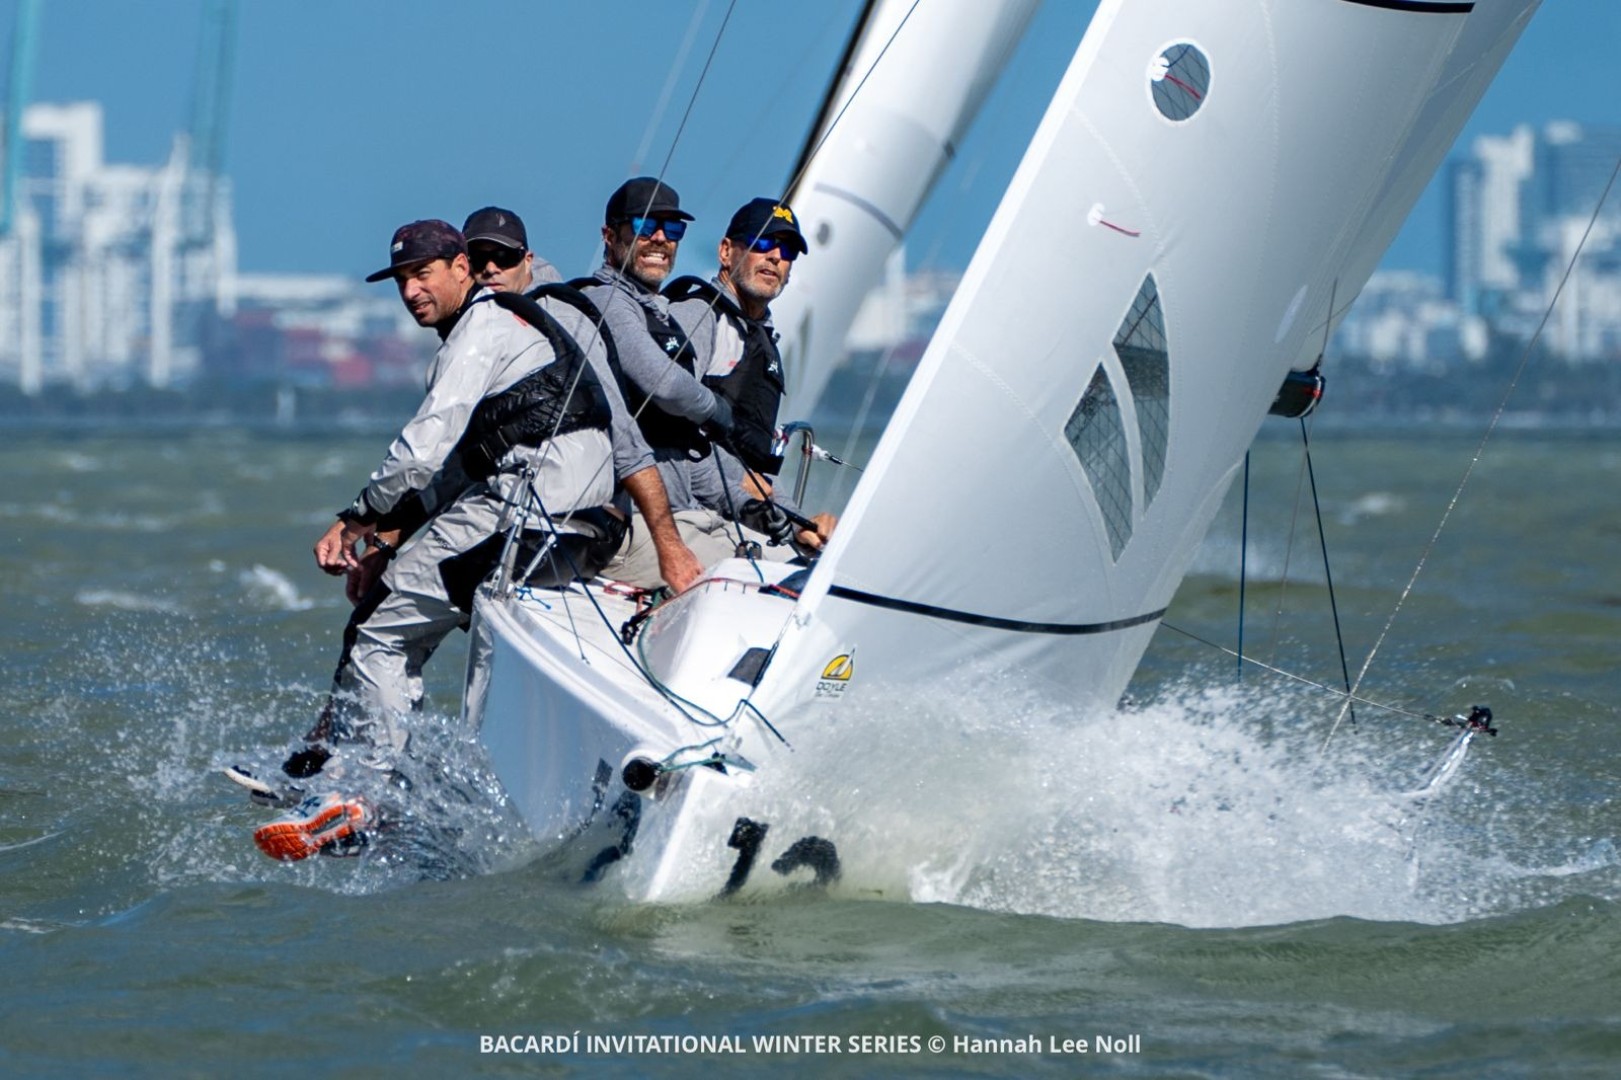 J/70: 'Very Odd' asserts control of the Biscayne Bay race track